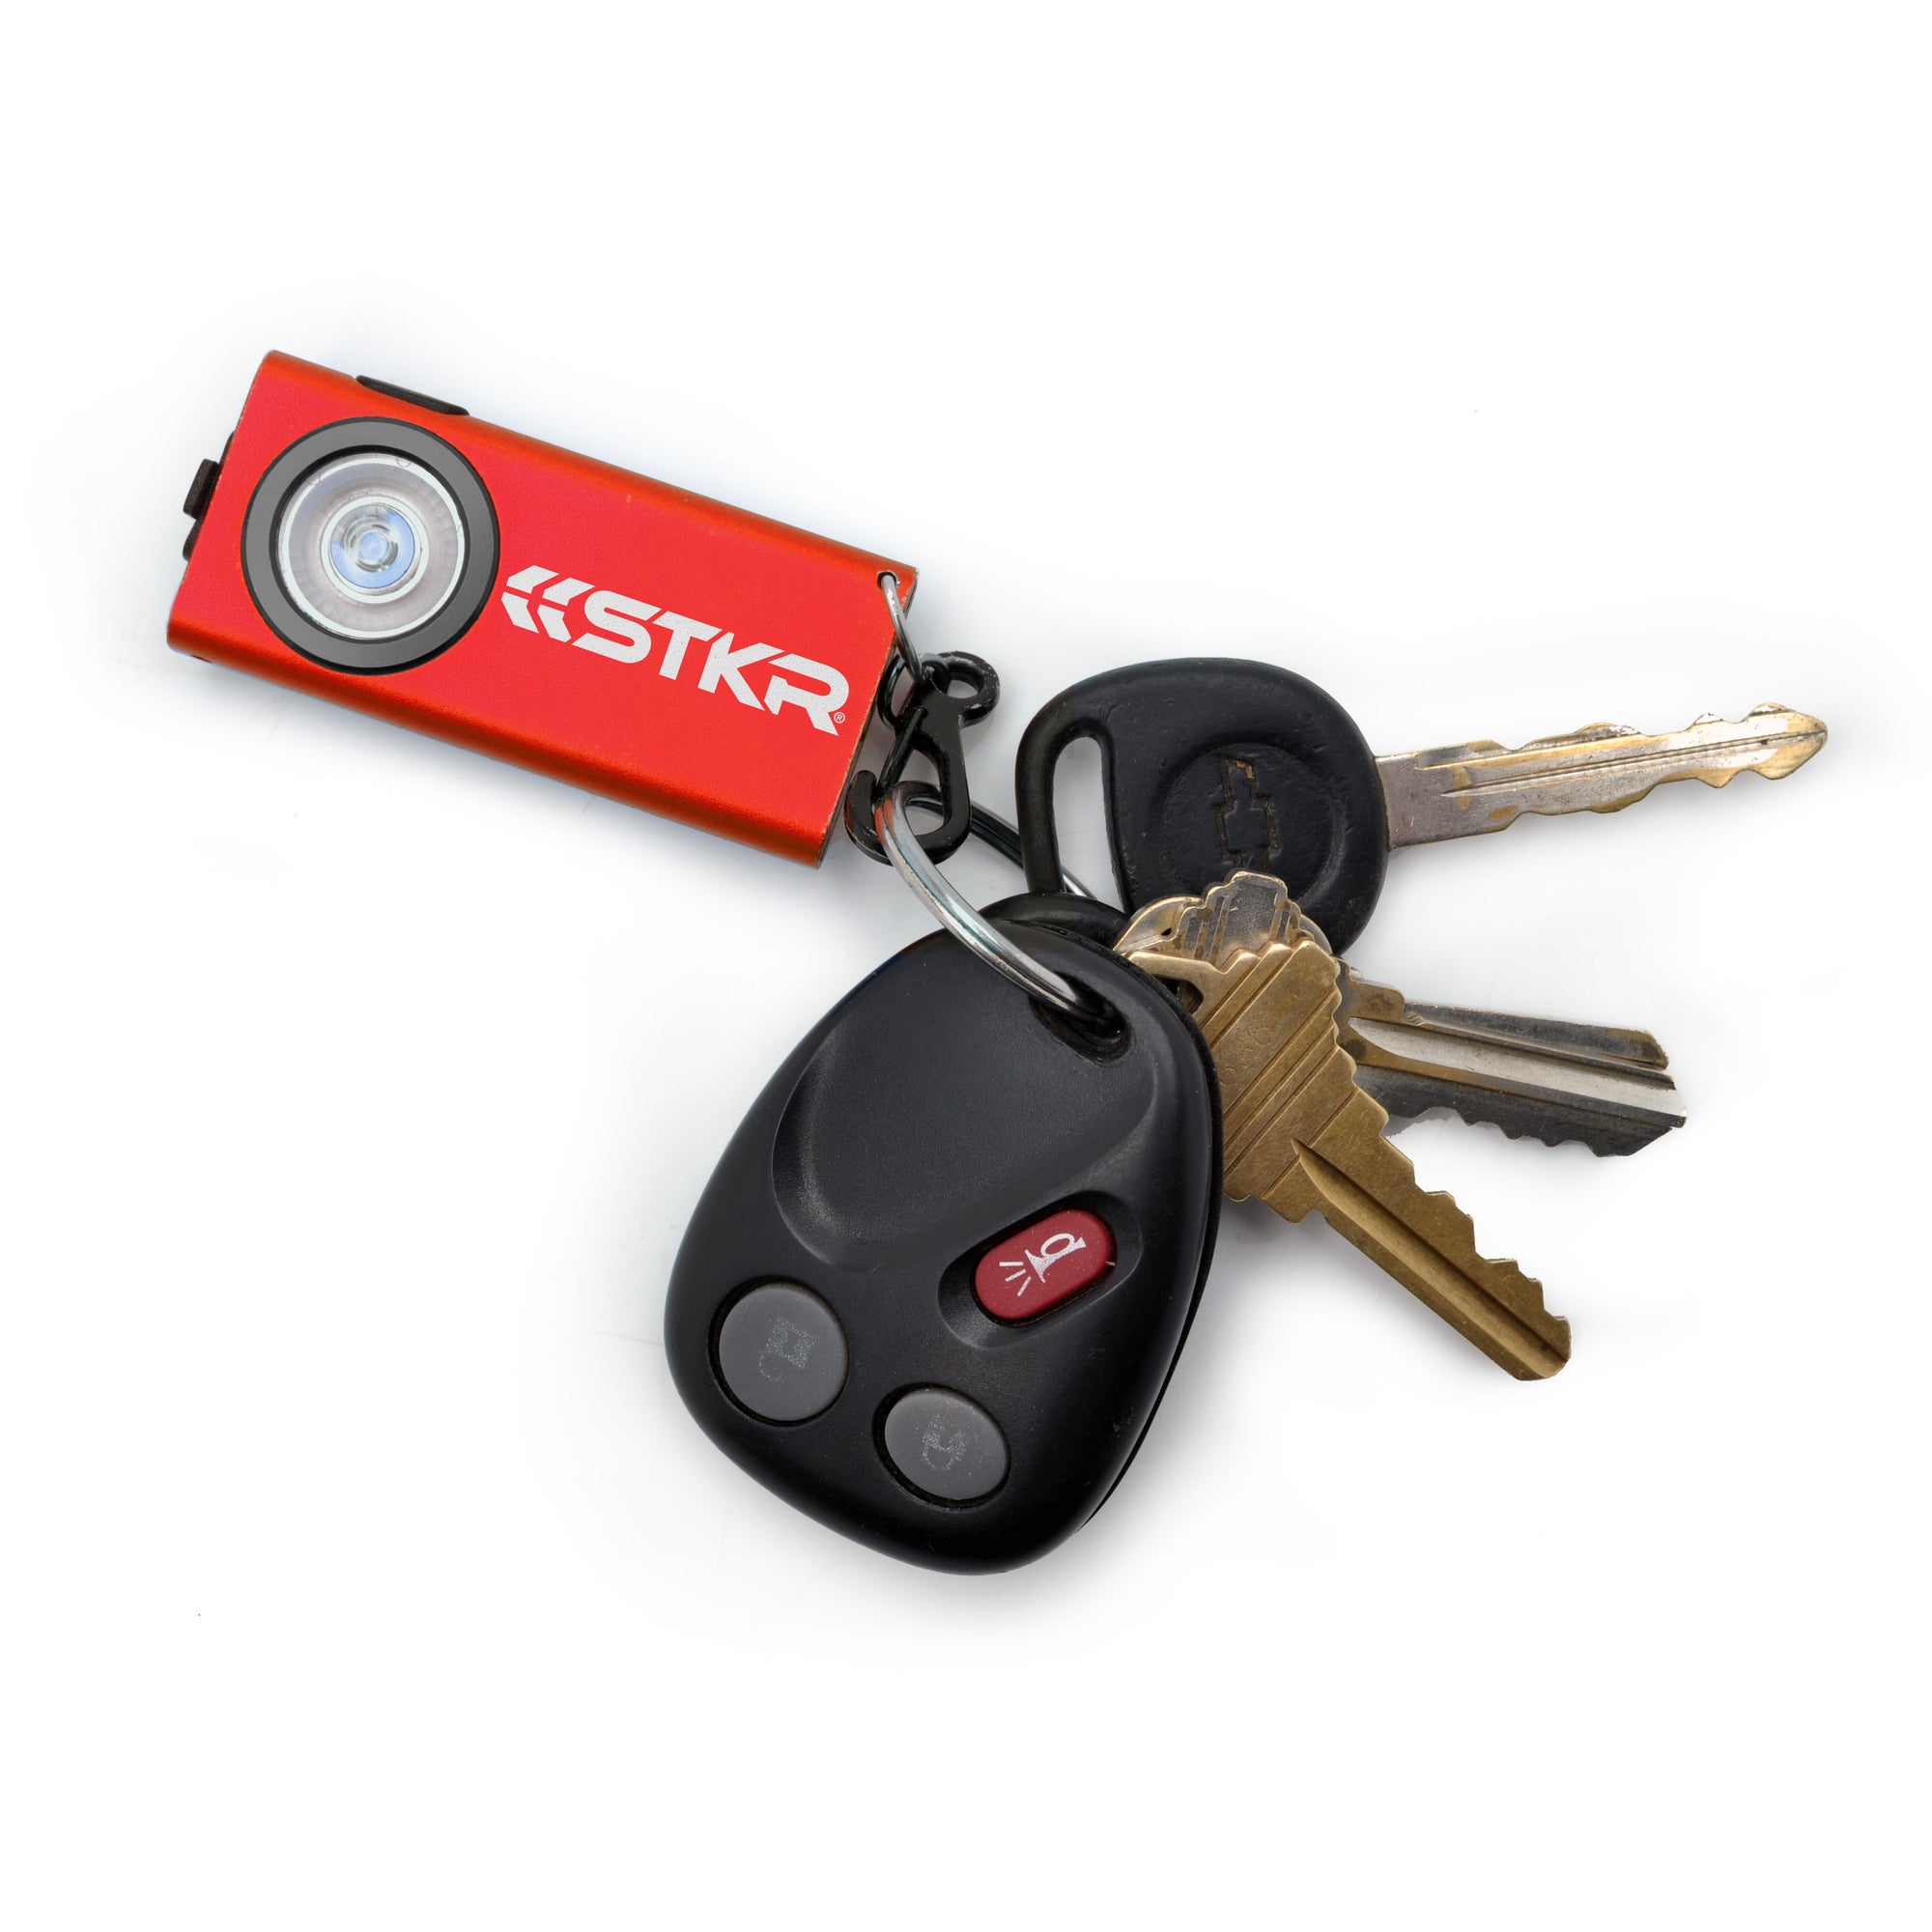 SlimJimmy Ultra-Bright Keychain Light - Red - with keys